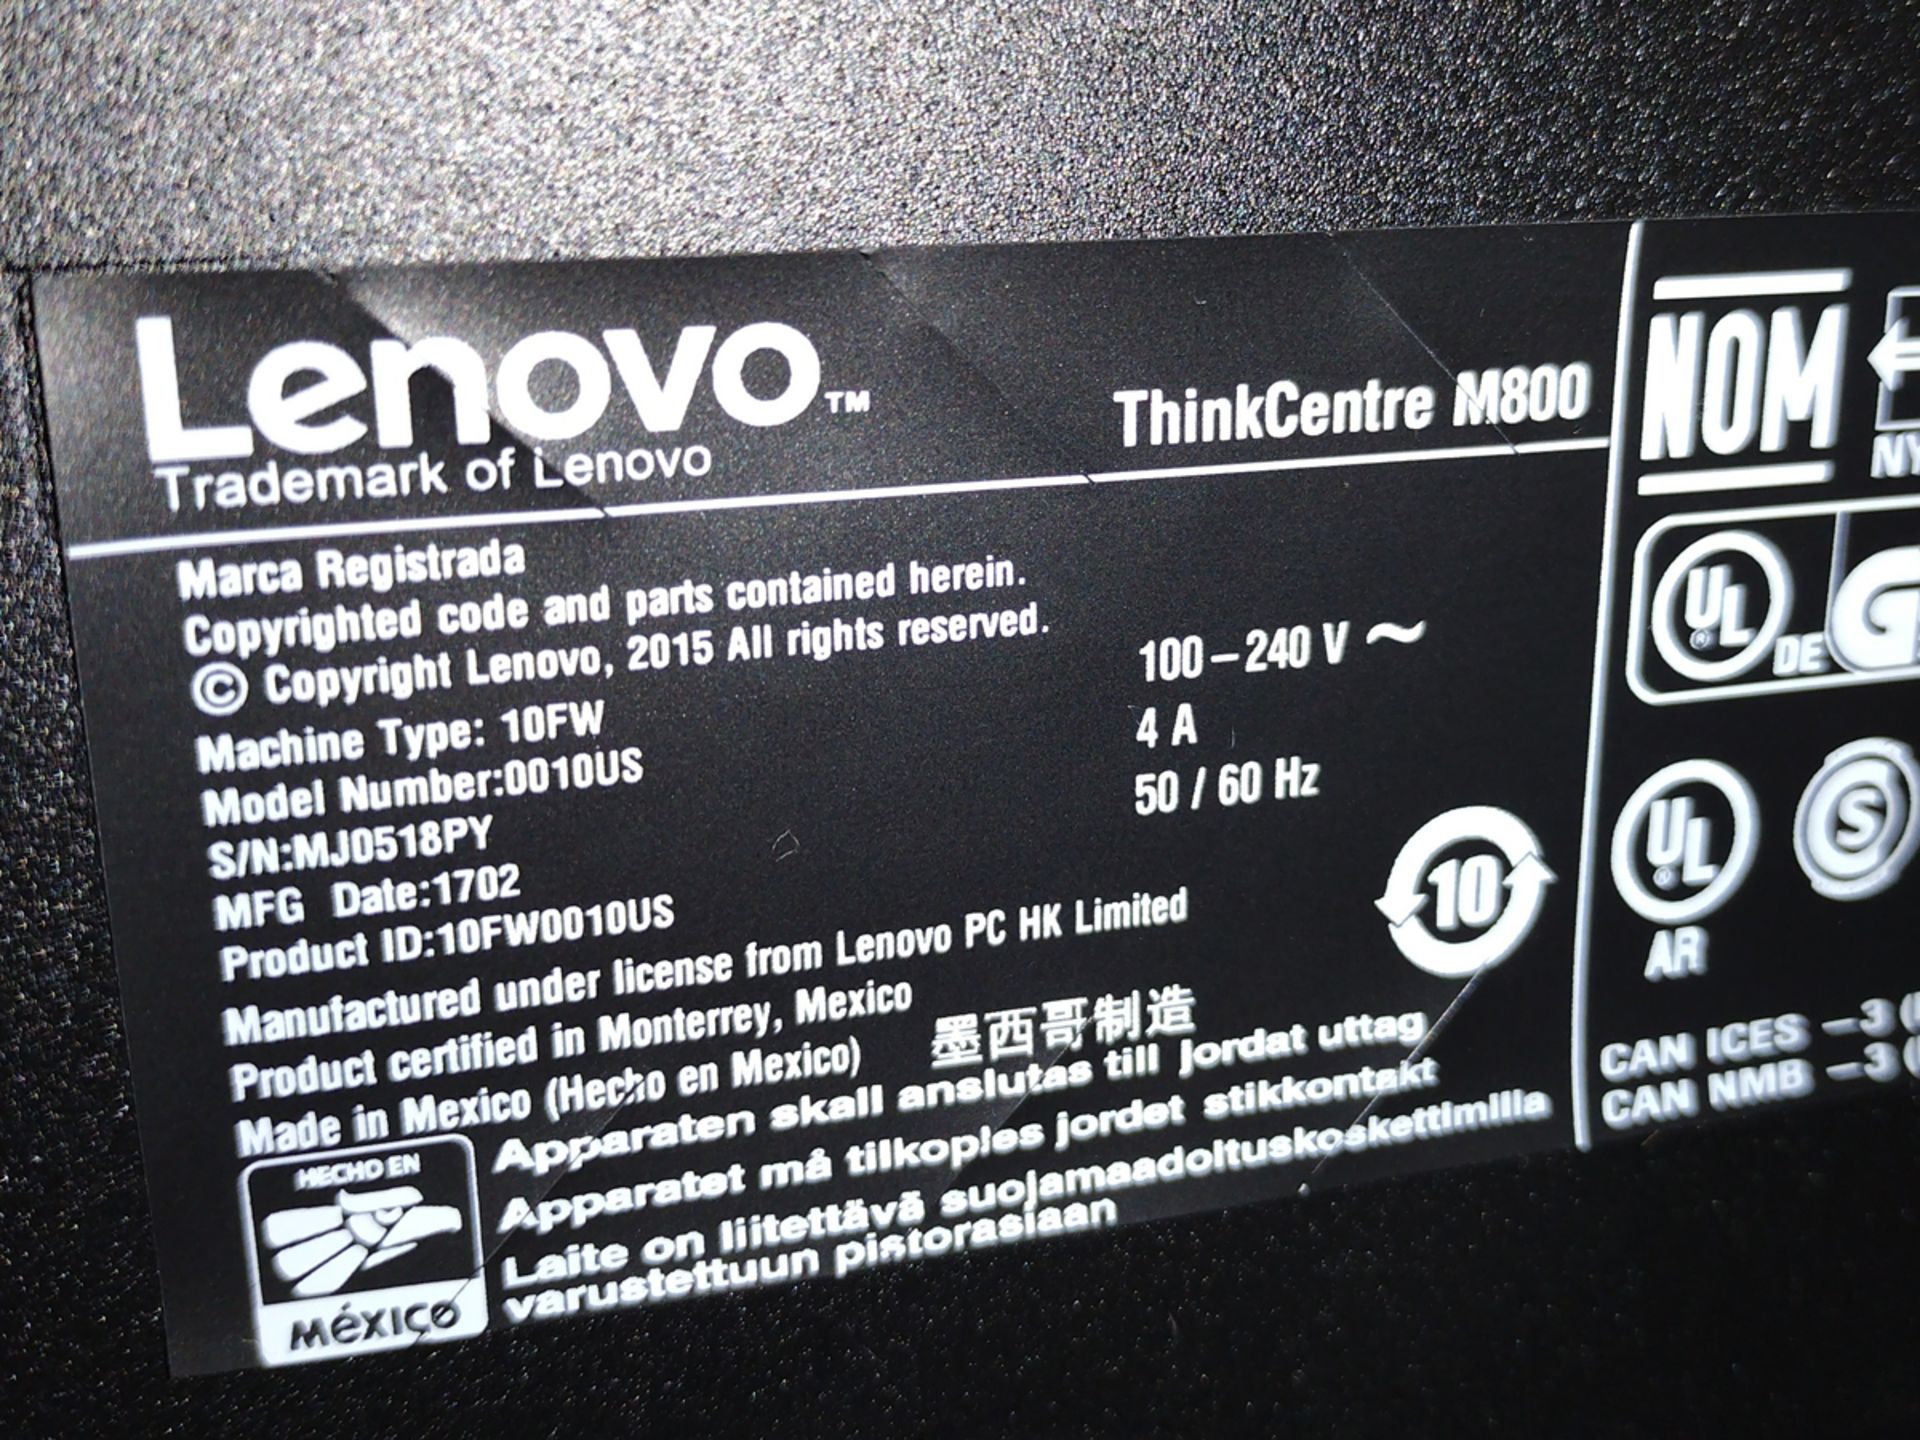 Lenovo M800 ThinkCentre i5 PC w/ Monitor and Keyboard - Image 2 of 2